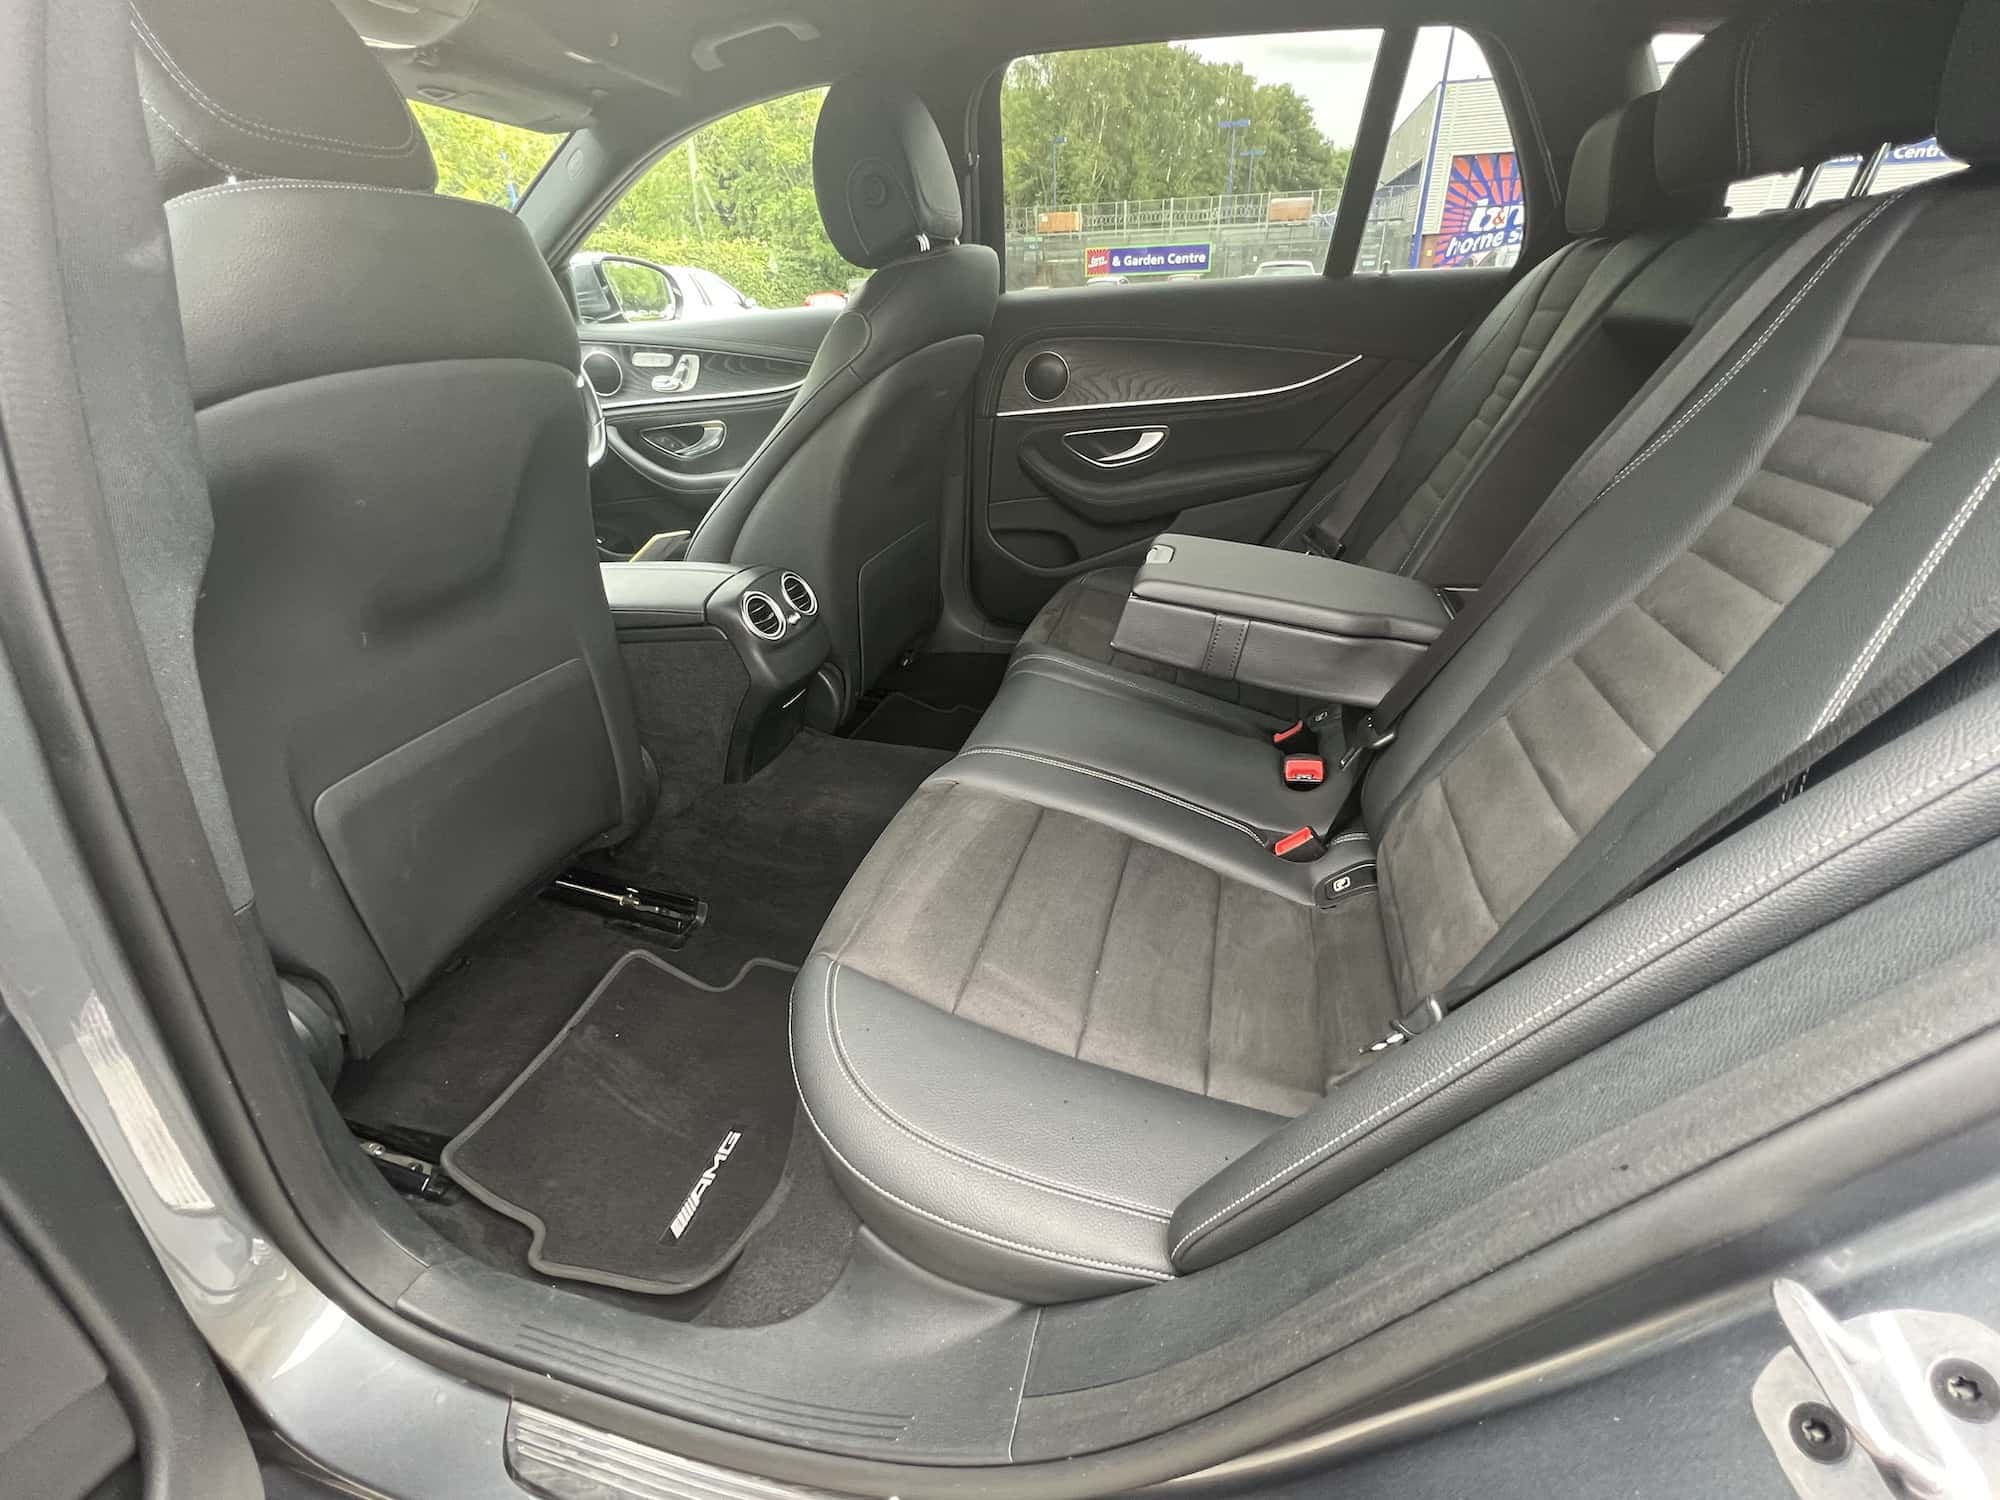 Rear Seats in one of our Mercedes E Class Derby Chauffeur cars